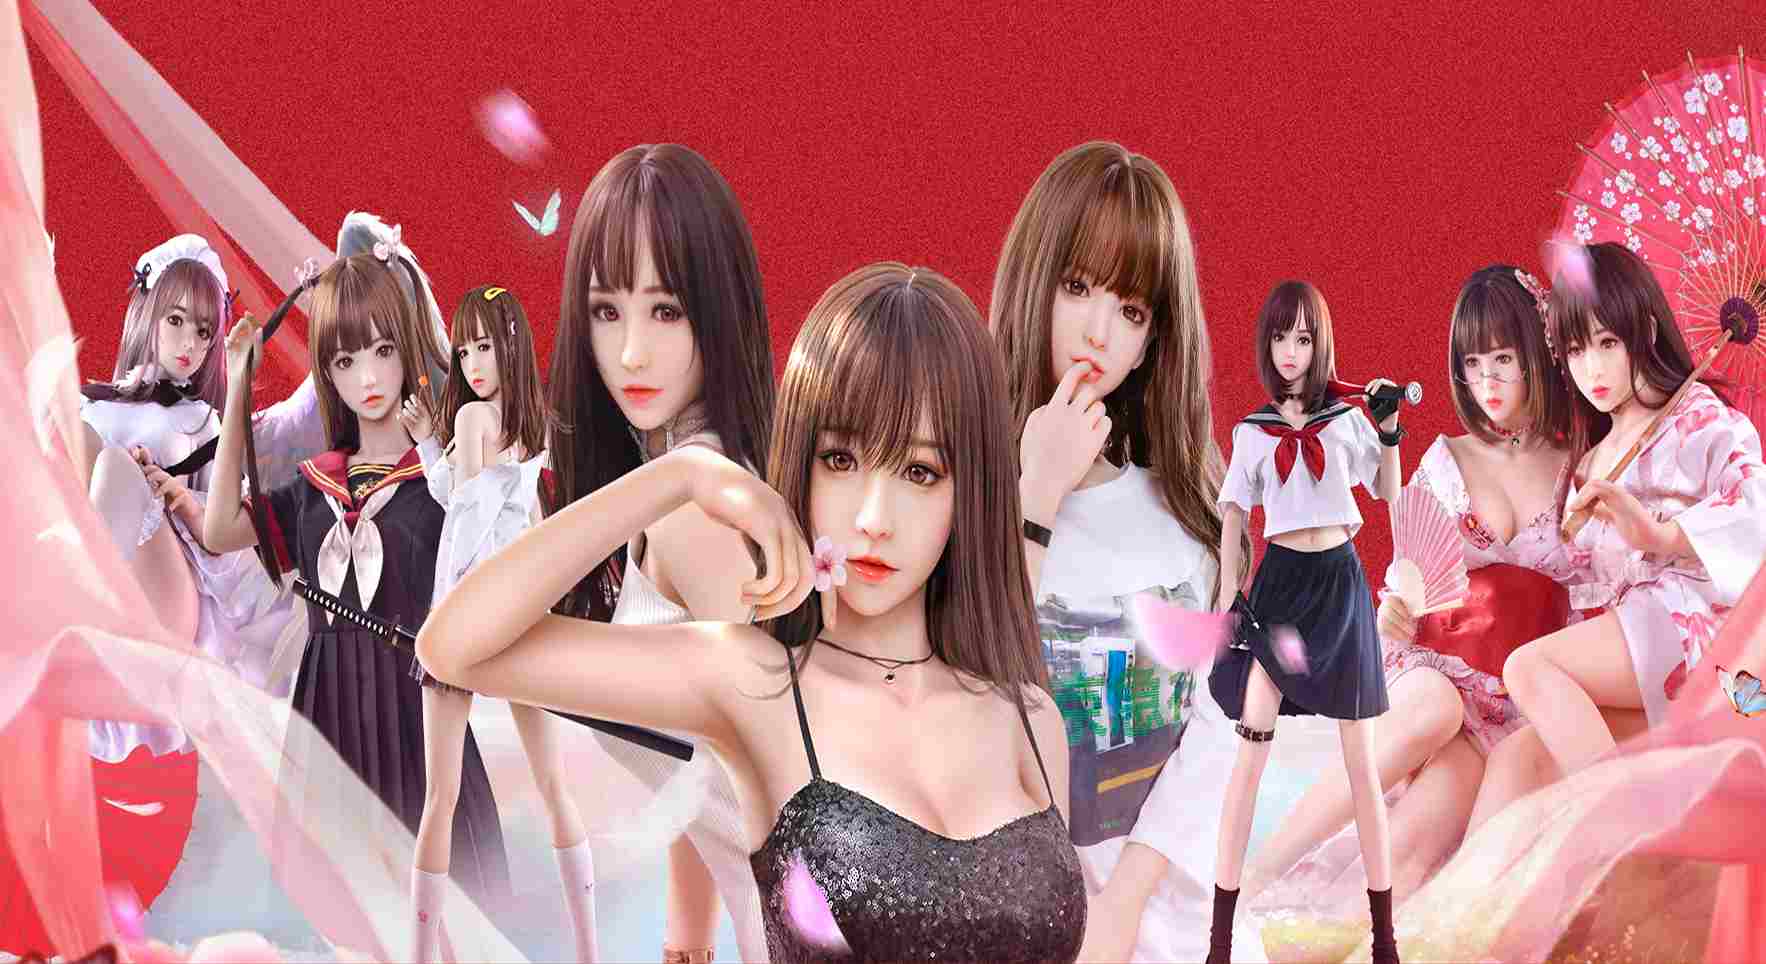 Top 5 AliExpress Sex Doll Stores: Unbeatable Quality